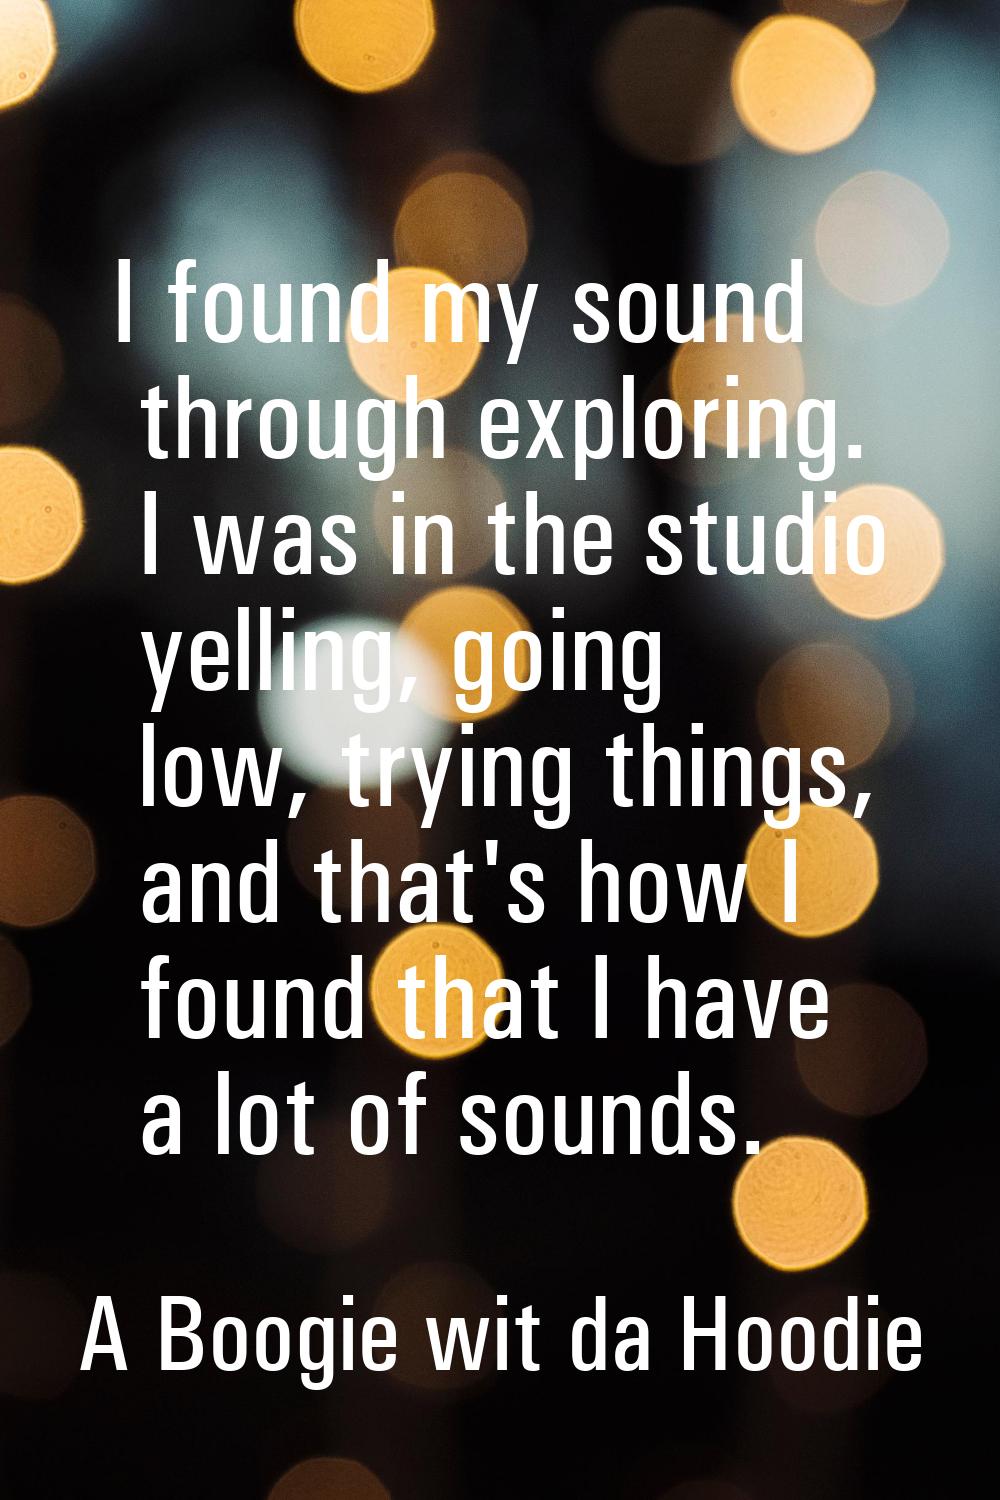 I found my sound through exploring. I was in the studio yelling, going low, trying things, and that